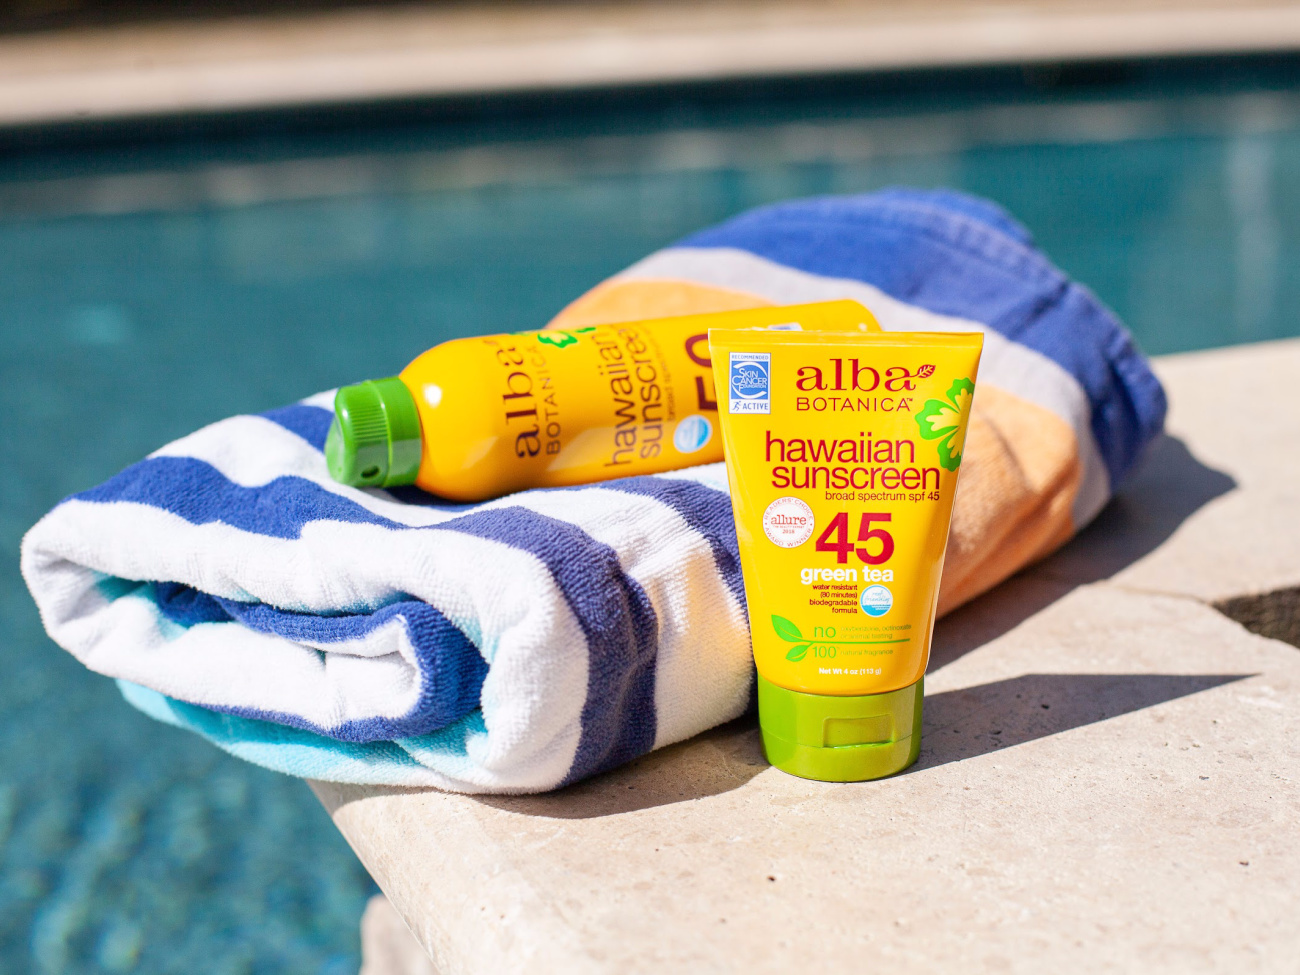 Big Savings On Alba Botanica Sunscreen Products Available Now At Publix on I Heart Publix